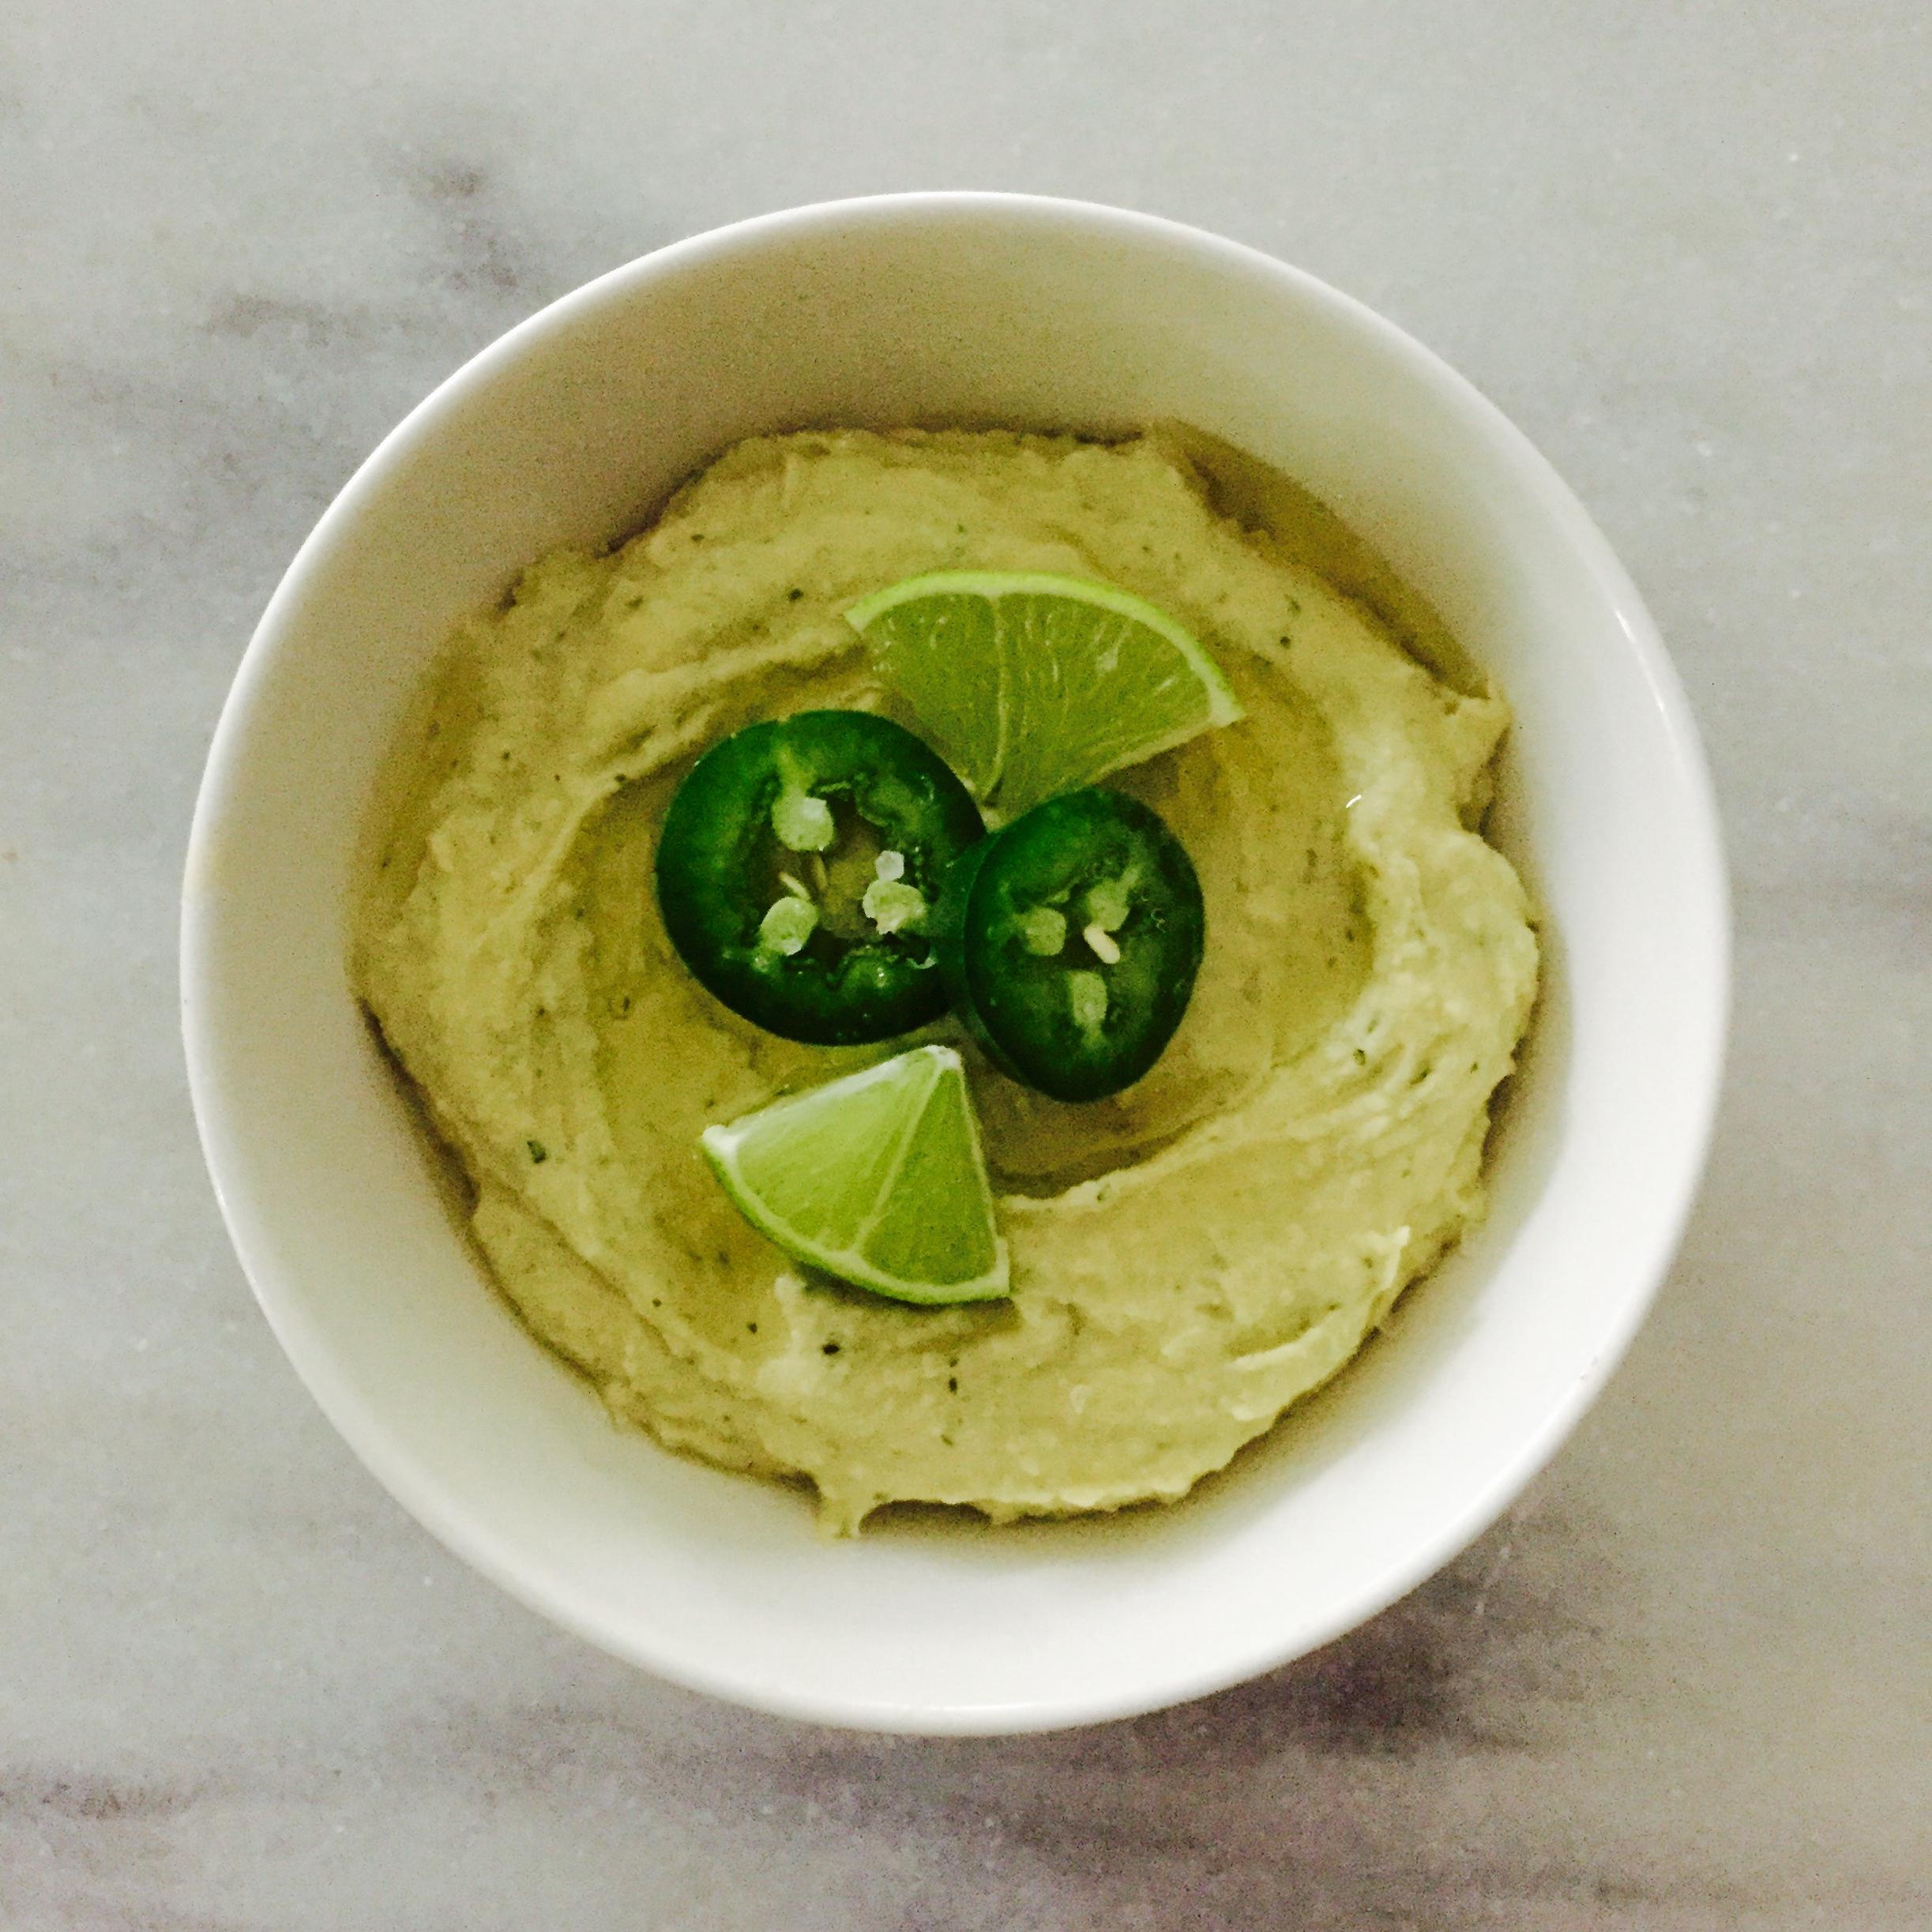  A spicy twist on the classic hummus recipe.